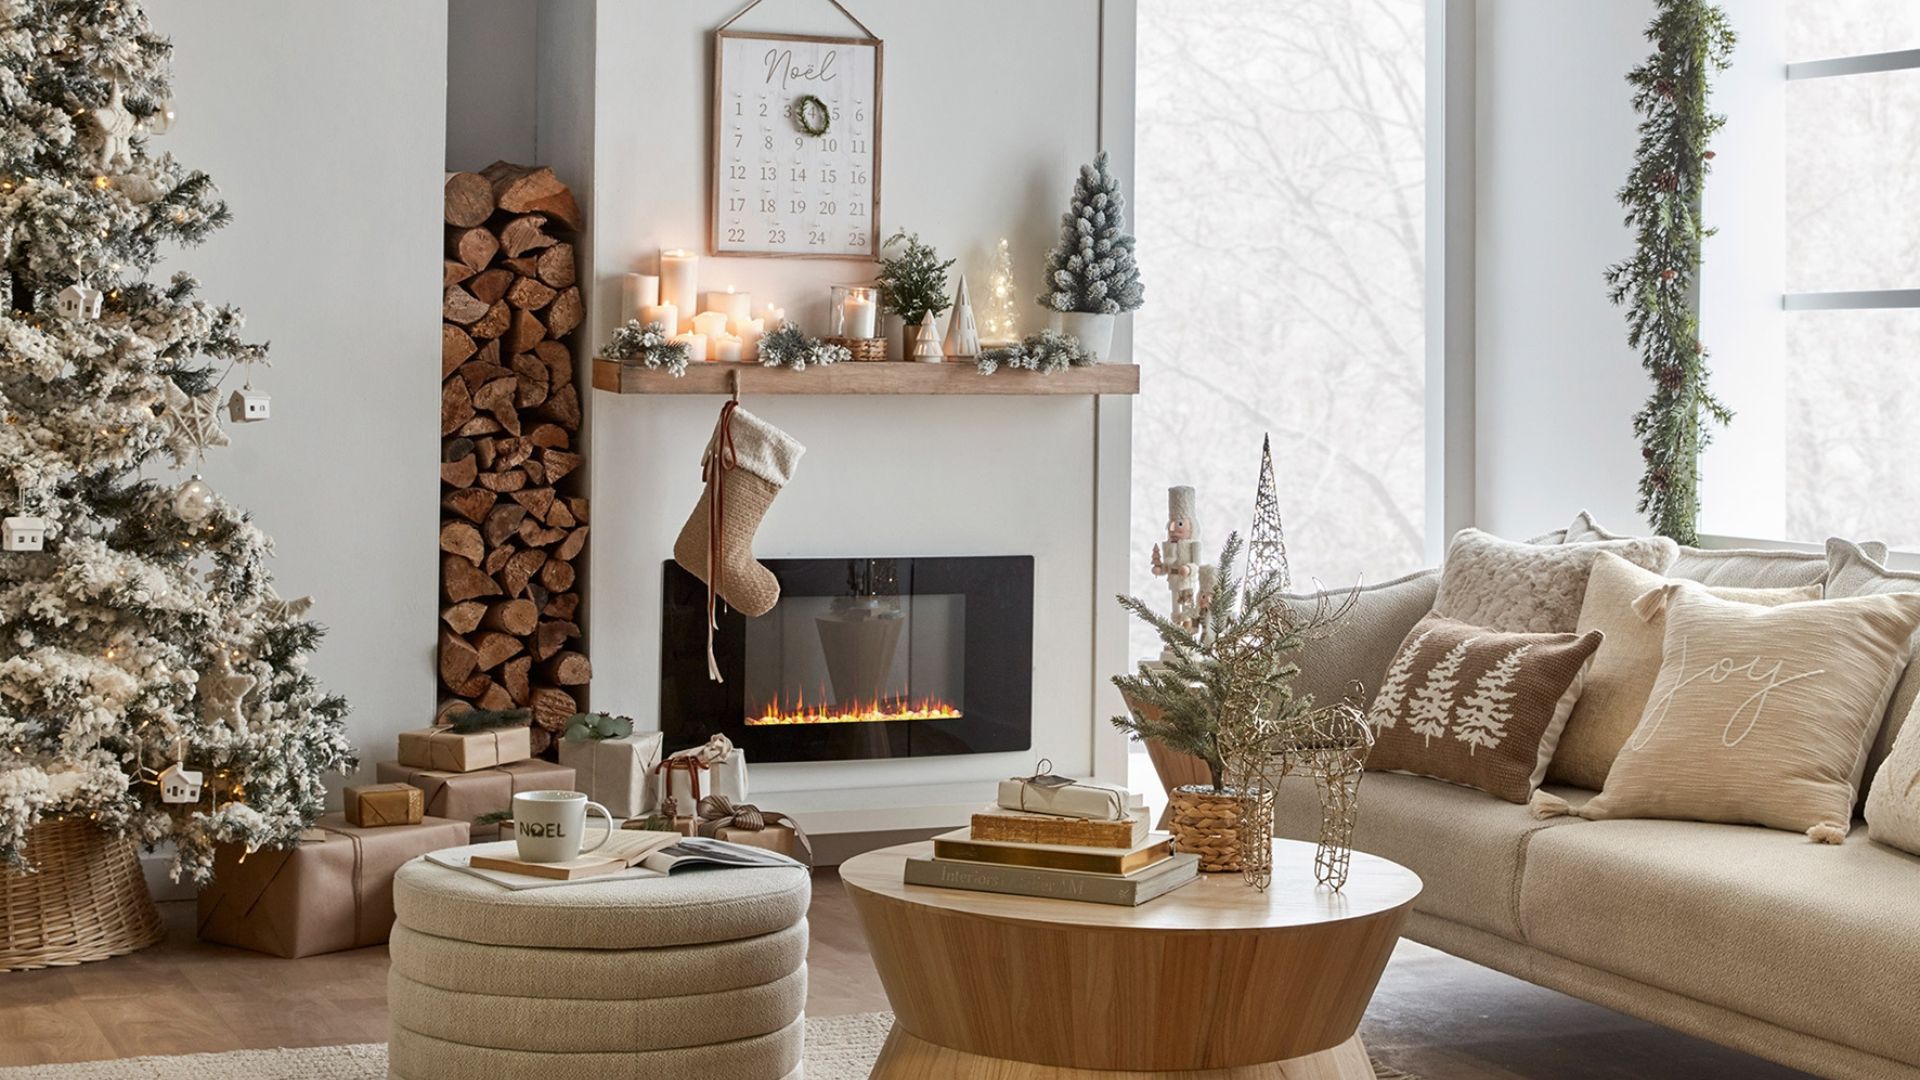 How to decorate your home this Christmas